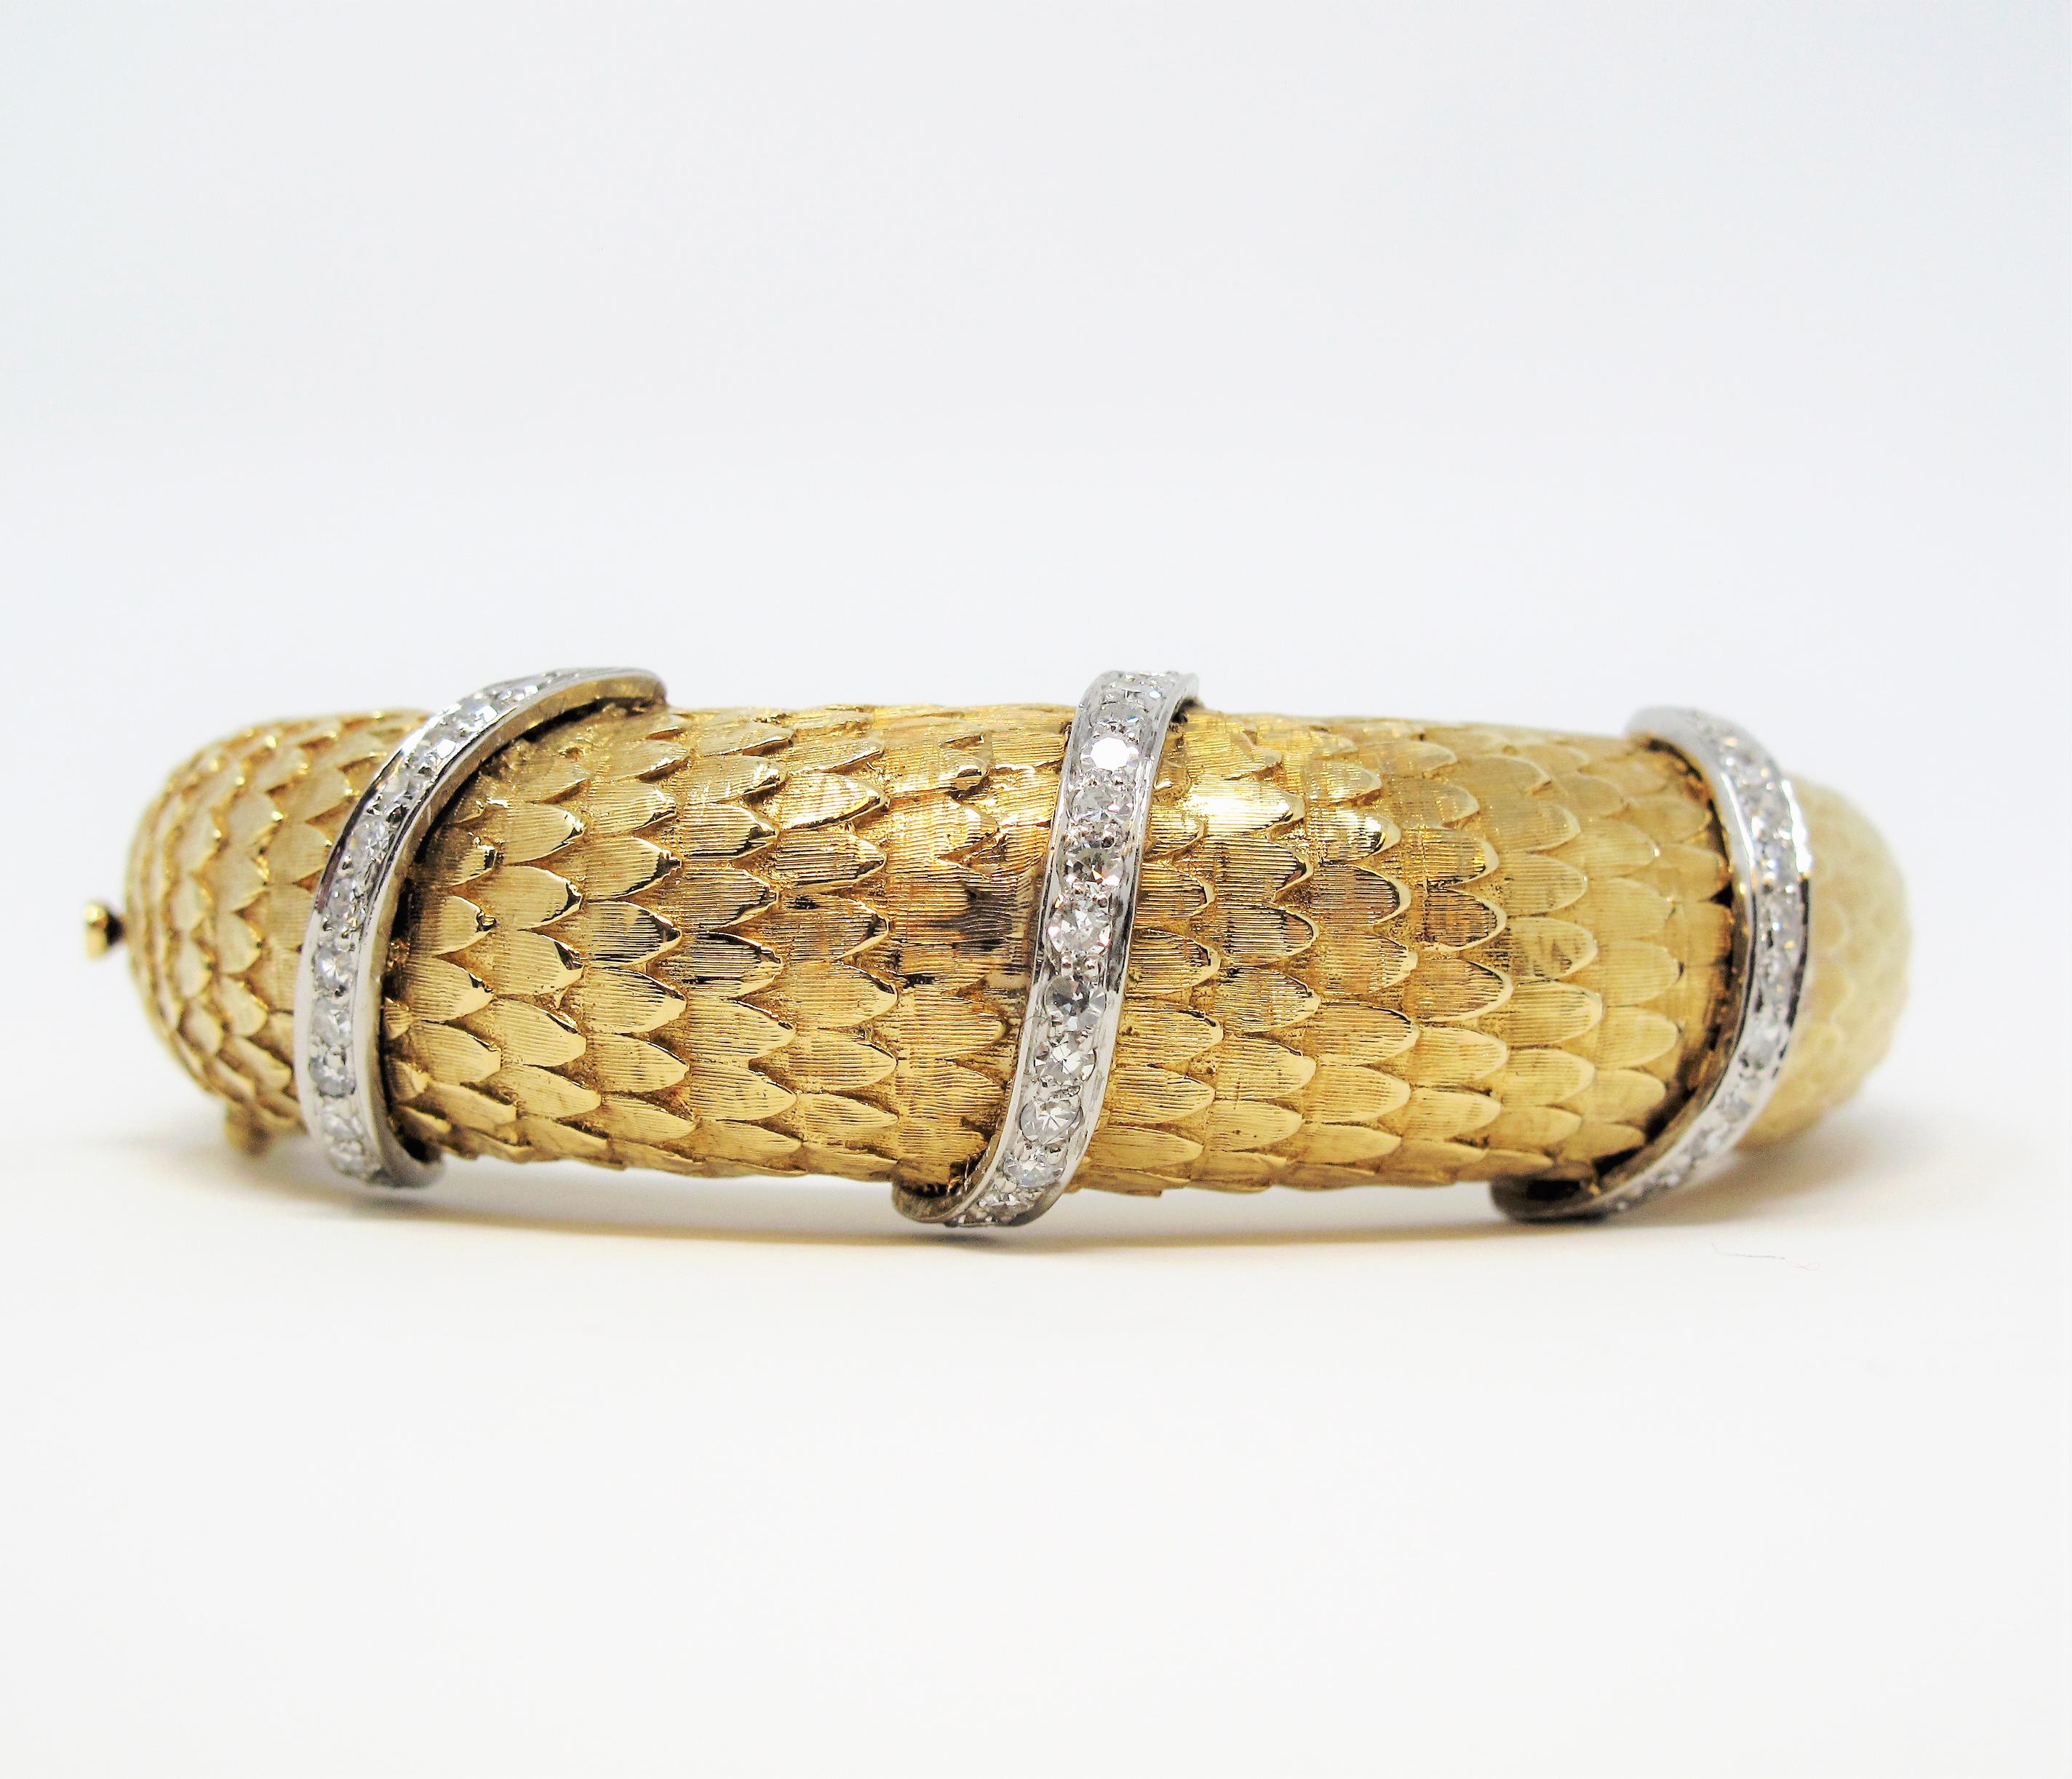 Incredible textured 18 karat gold bangle bracelet with pave diamond accents. This stunning piece has a delightfully detailed texture that you can practically feel without even touching it! The contrasting diamond embellishments add a subtle movement